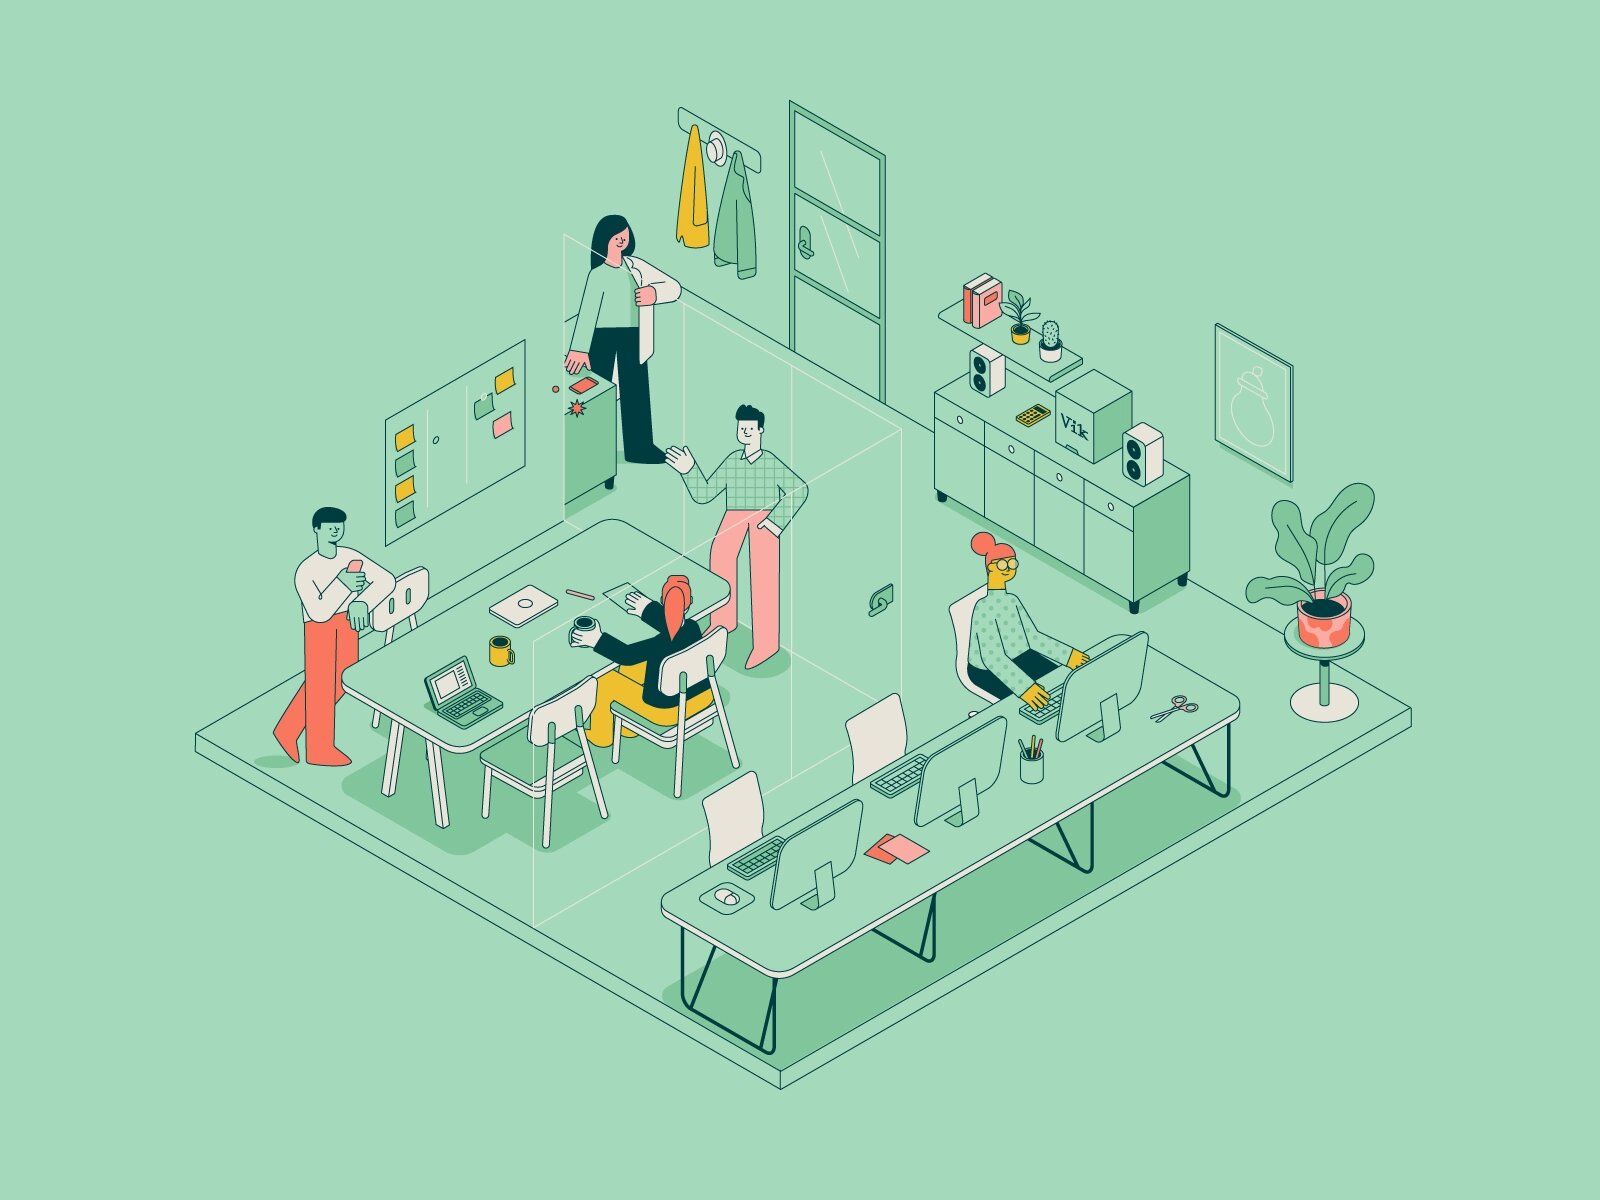 For the productive software development process, it’s essential to create a friendly atmosphere (*image by [Patswerk](https://dribbble.com/Patswerk){ rel="nofollow" target="_blank" .default-md}*)